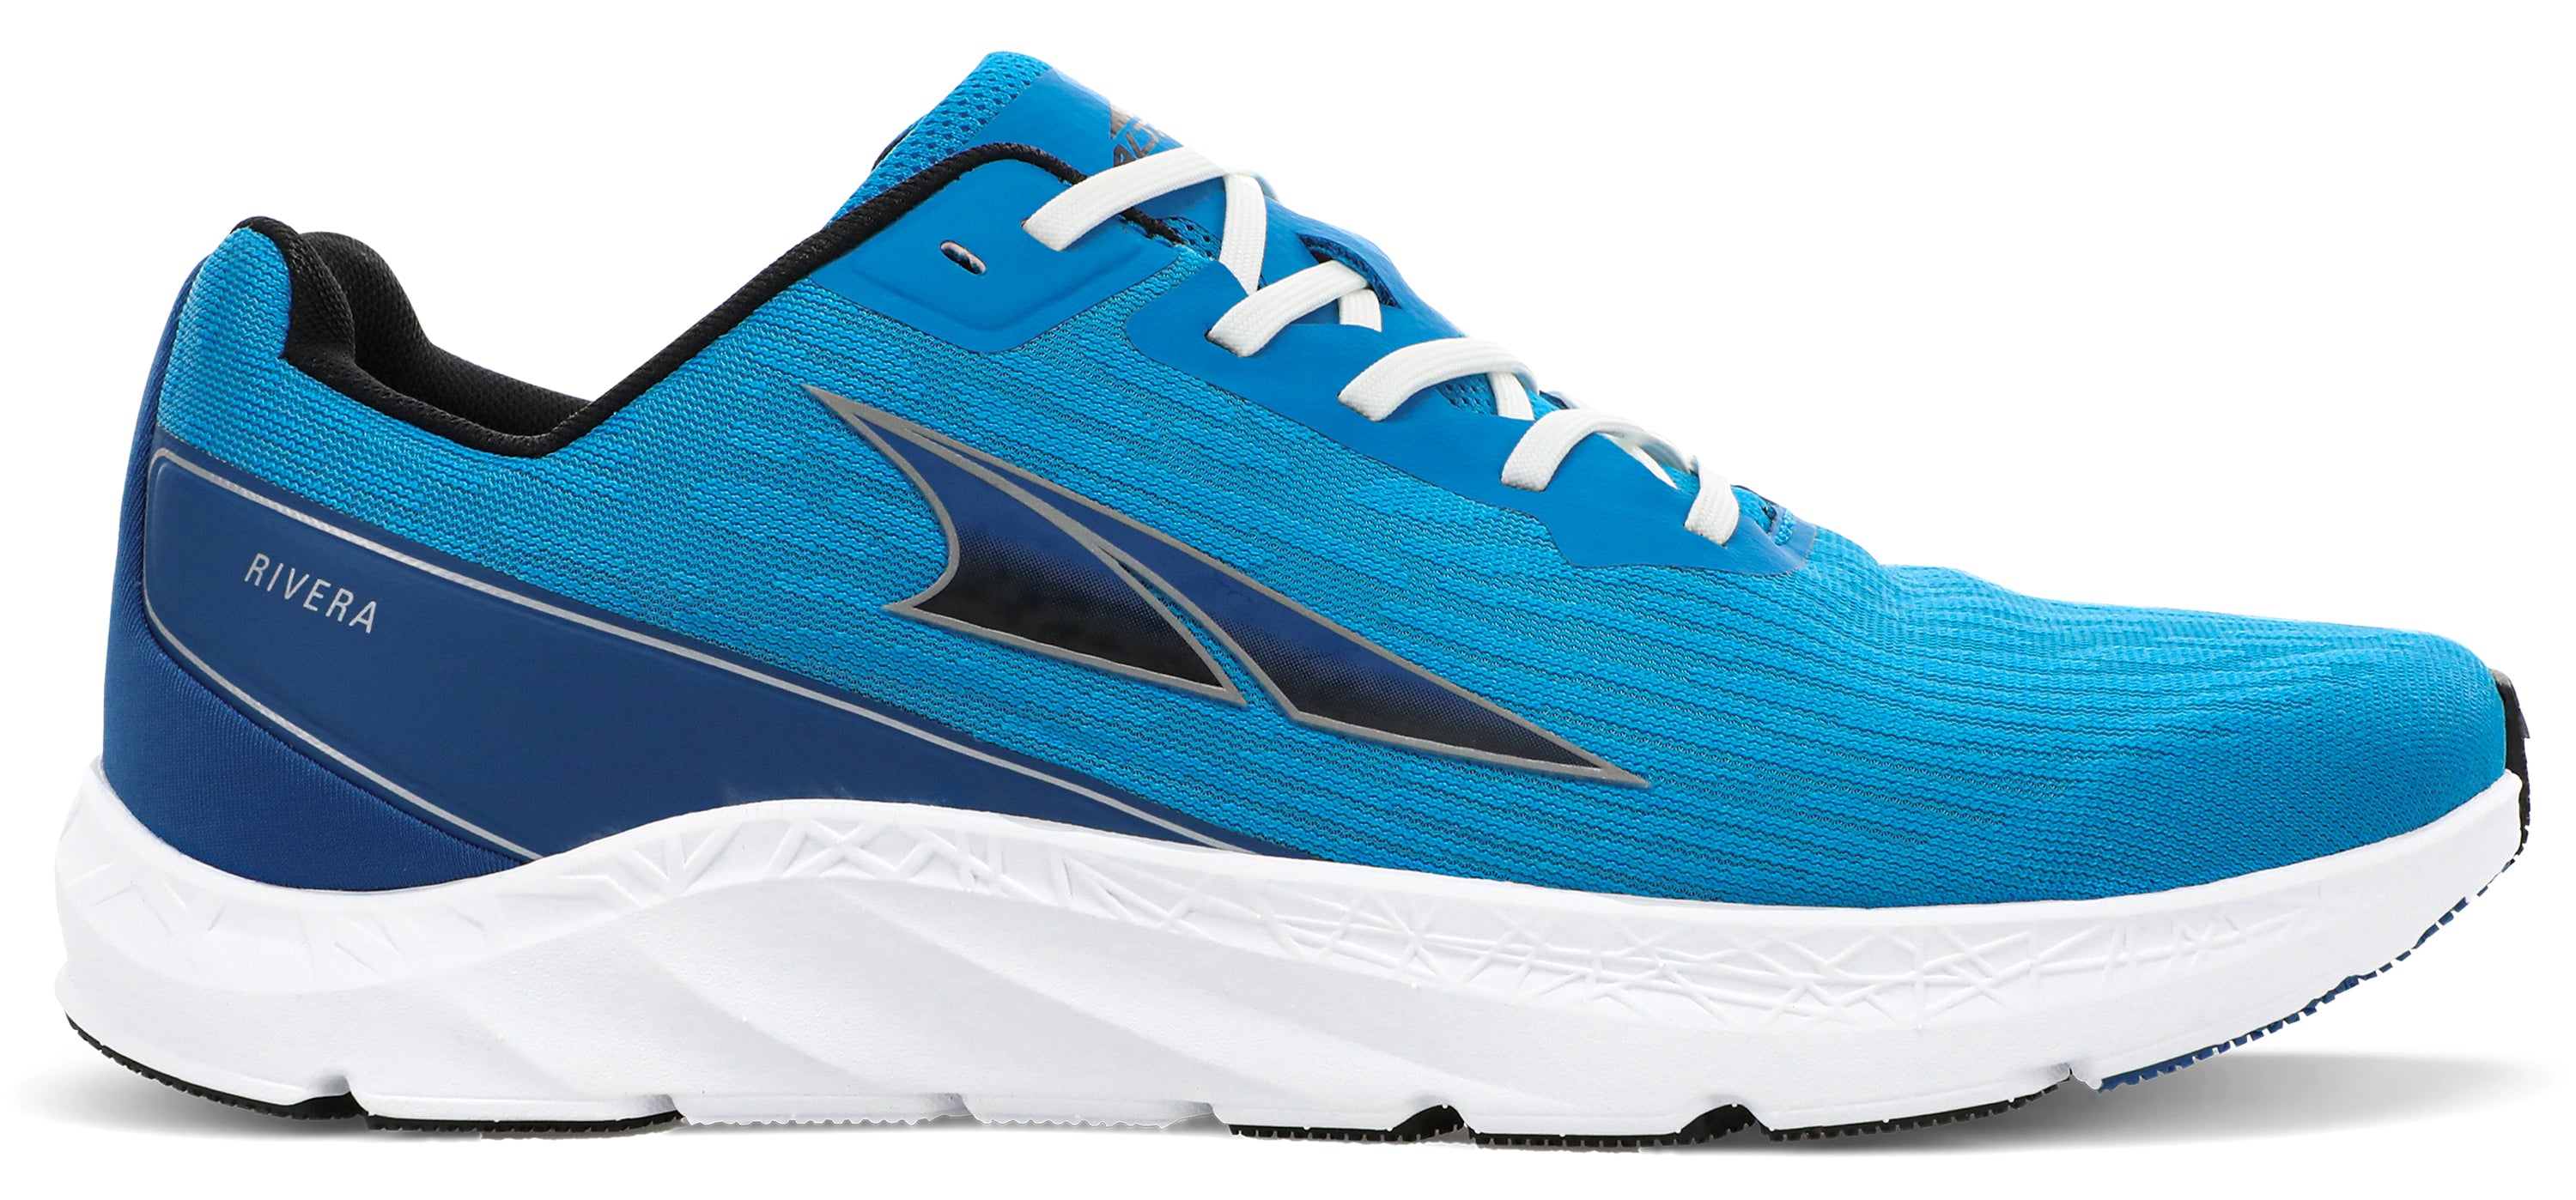 Altra Men's Rivera Road Running Shoe in Light Blue from the side